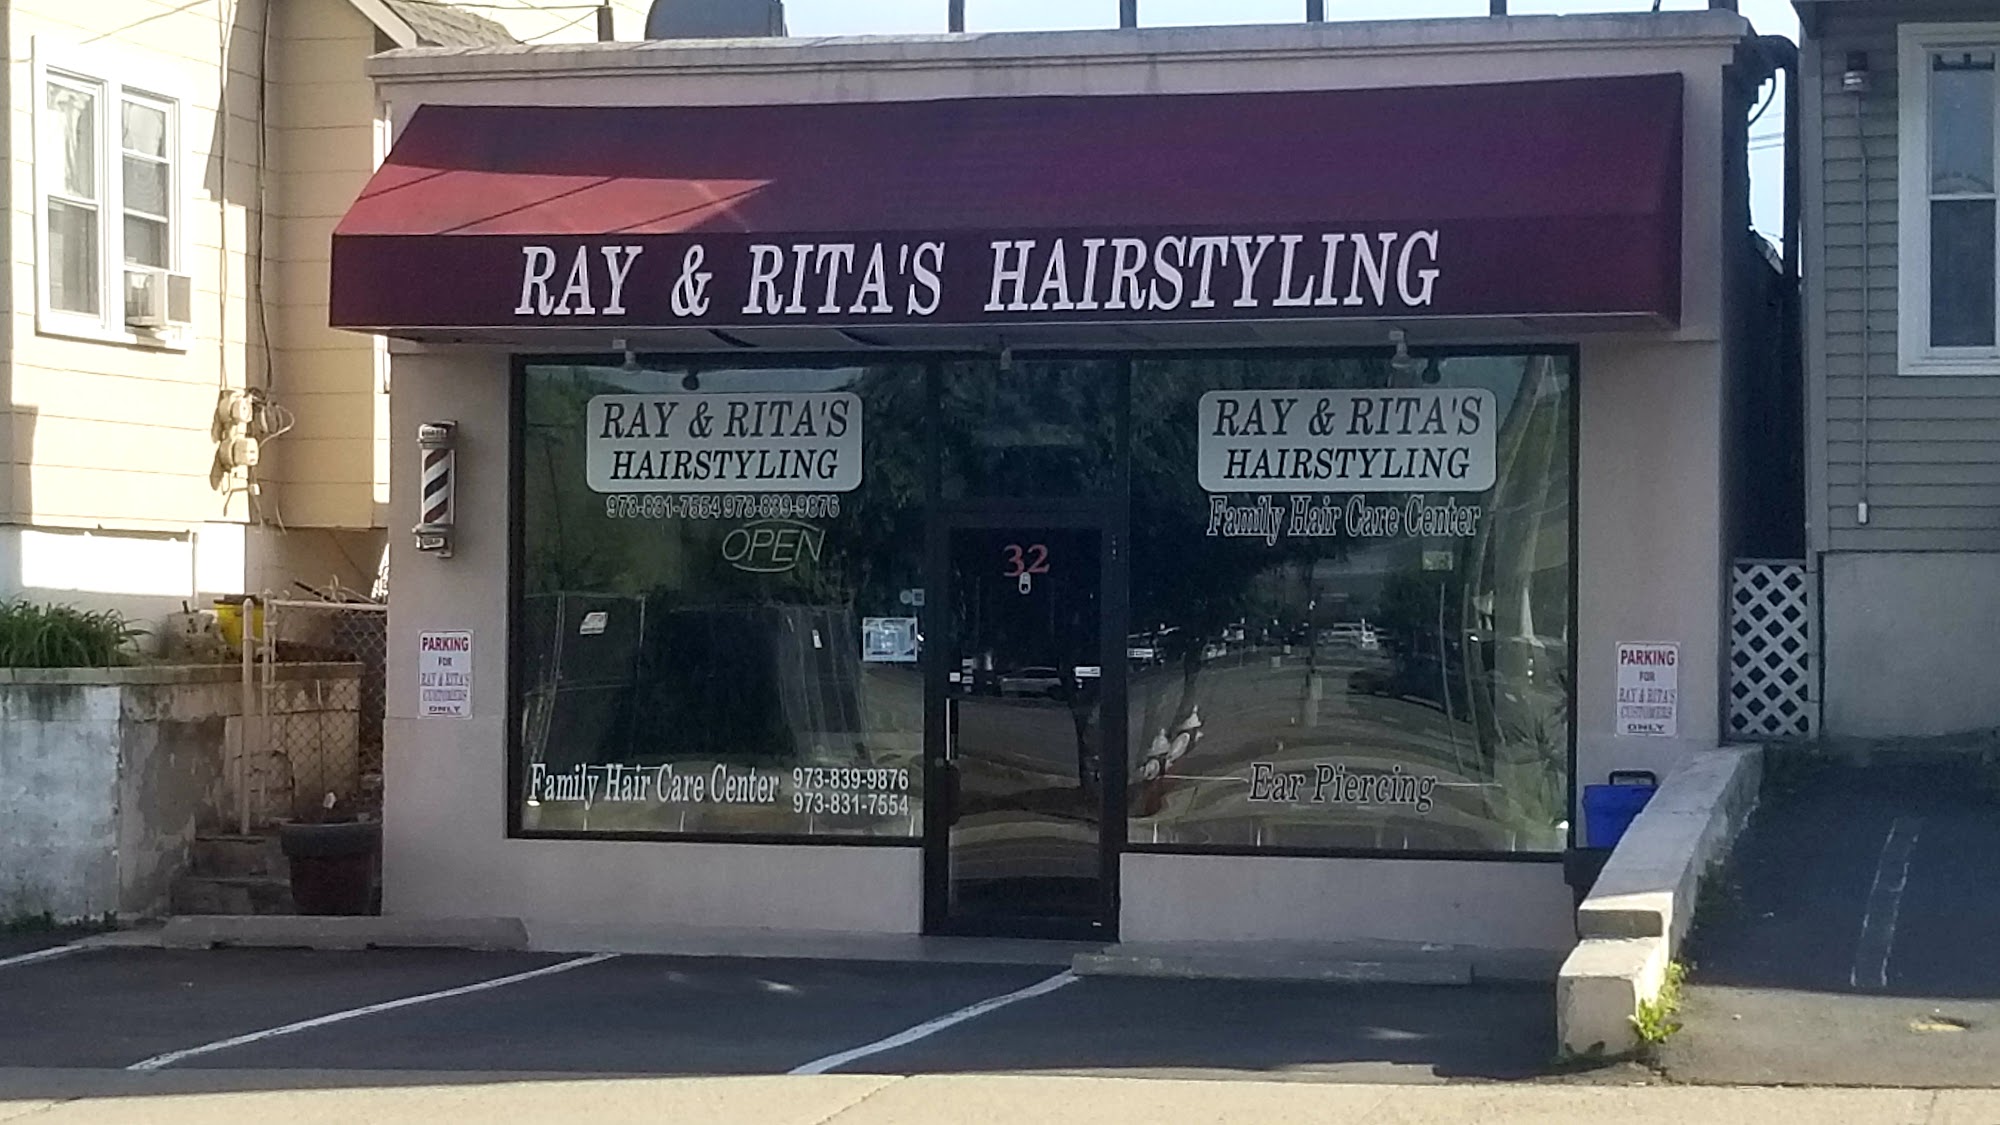 Ray & Rita's Hairstyling 32 Wanaque Ave, Pompton Lakes New Jersey 07442